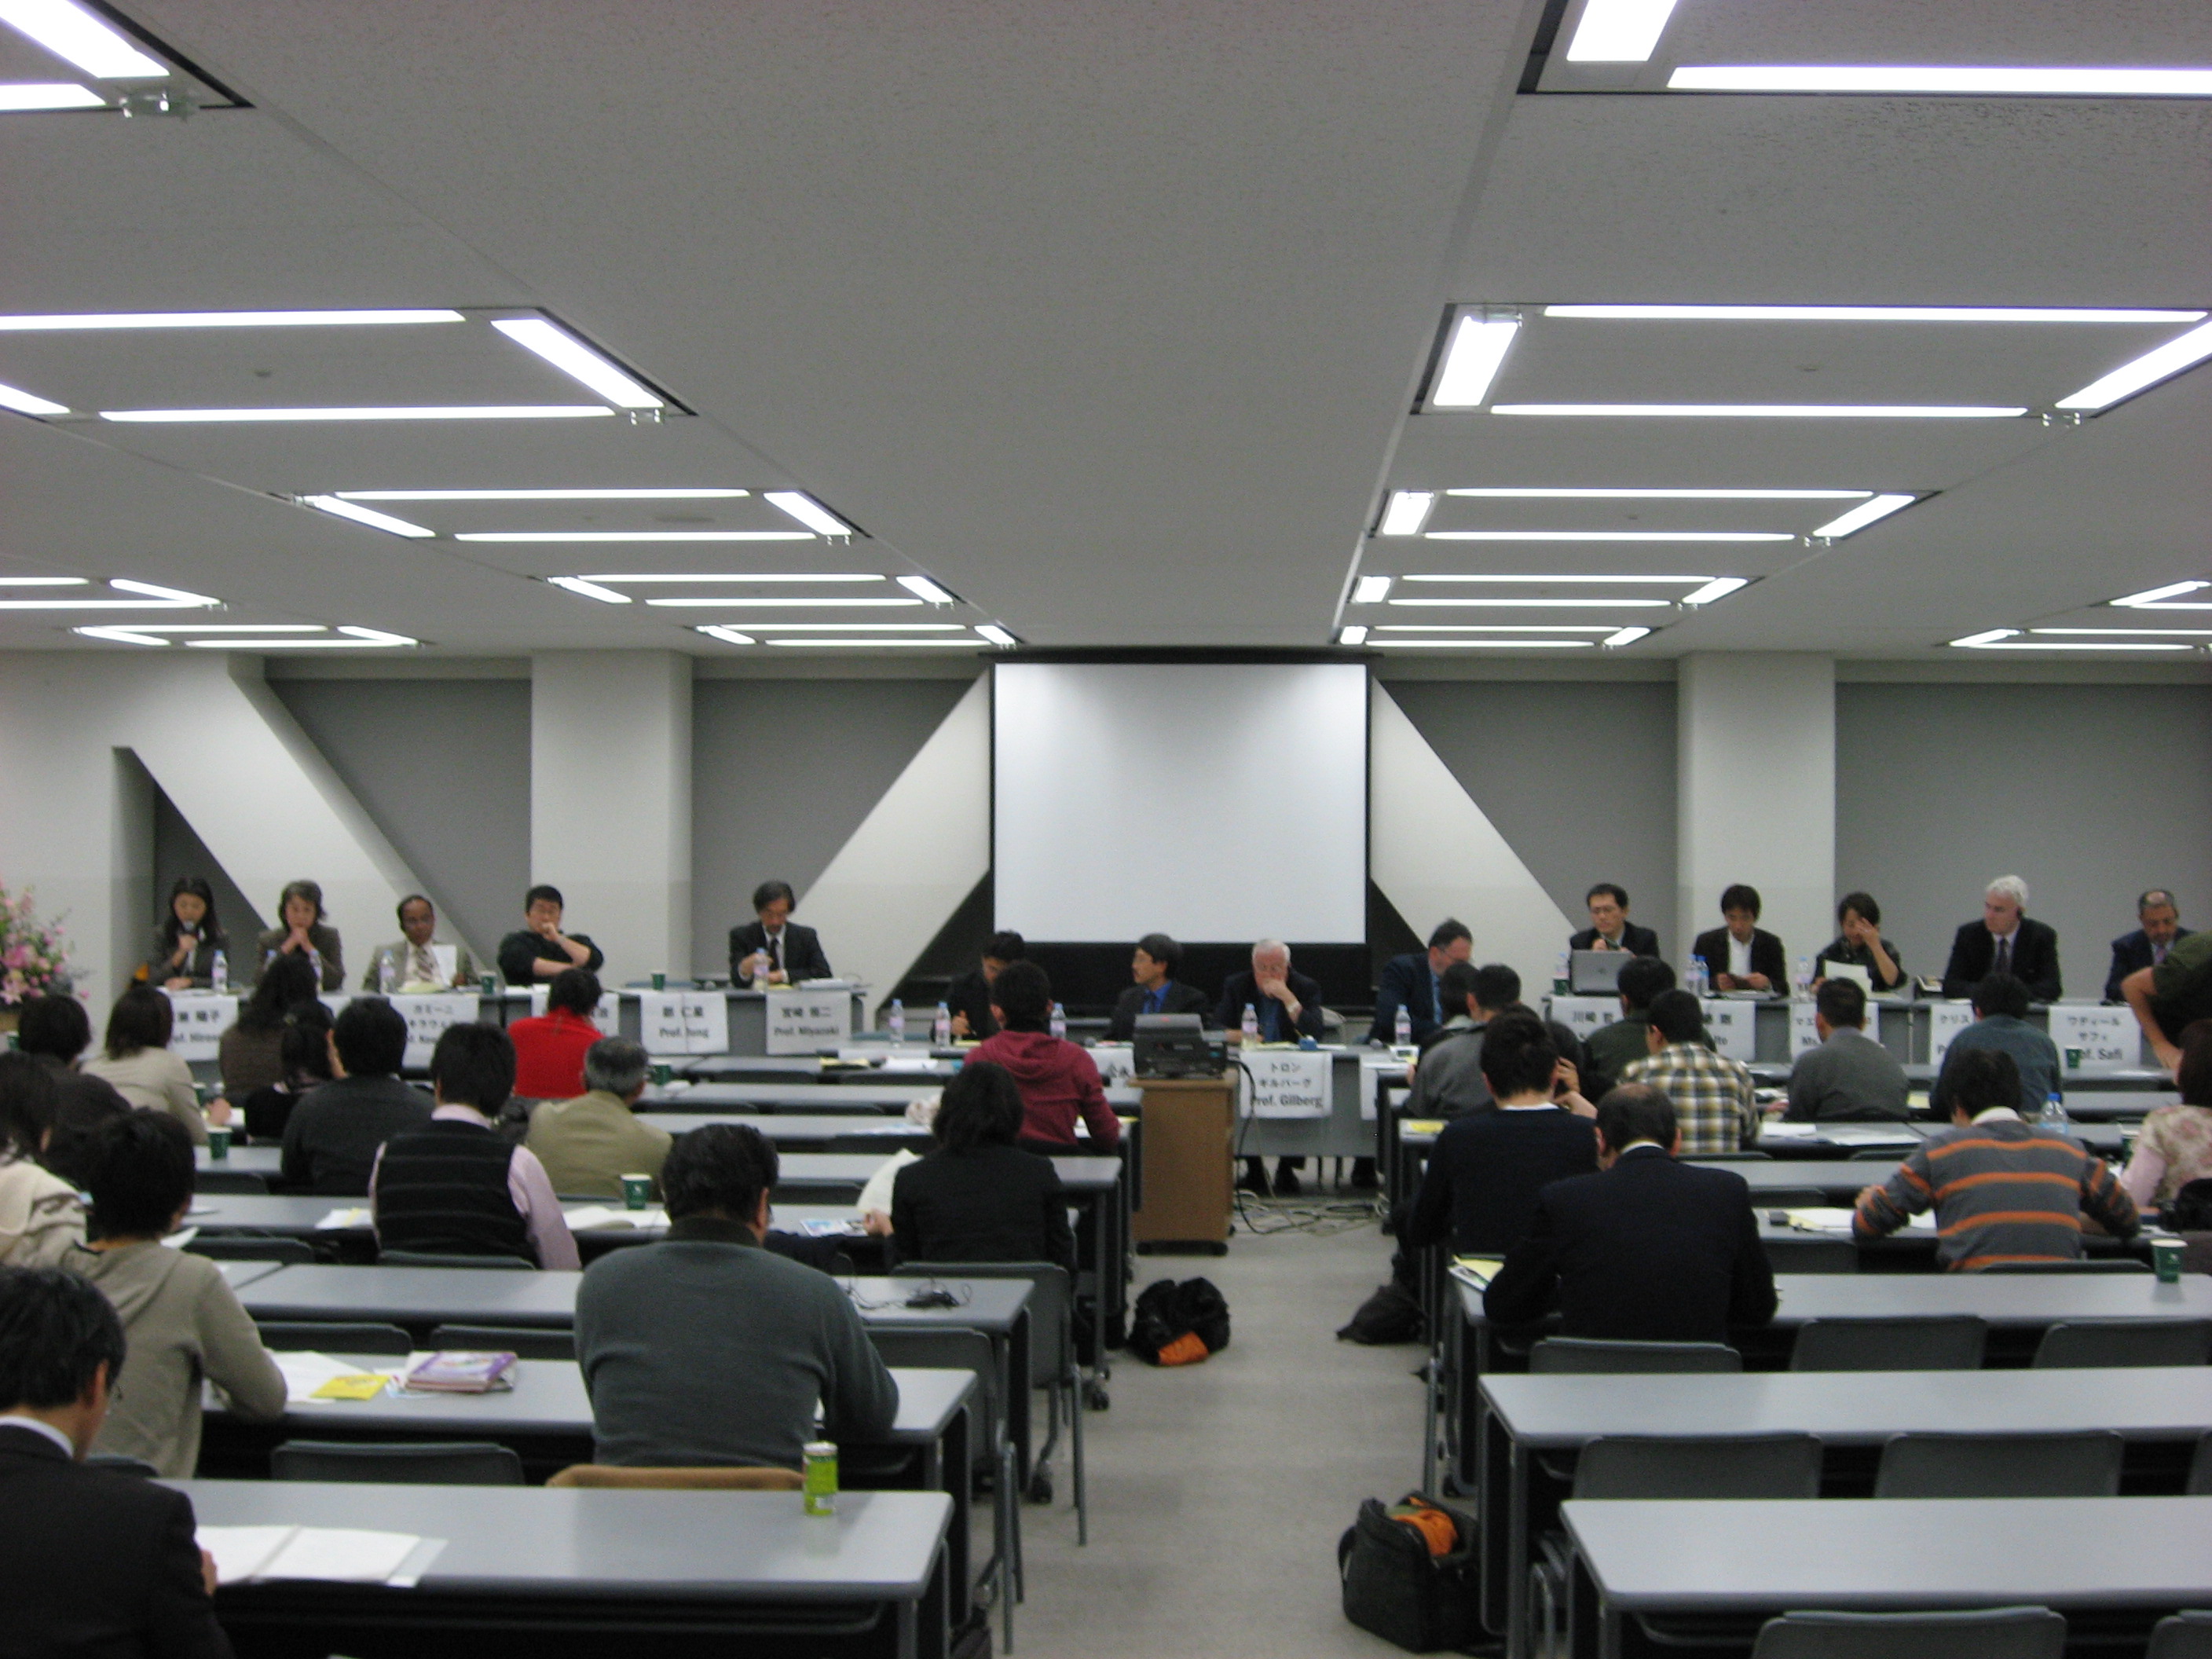 The International Symposium facilitated by TUFS in Tokyo